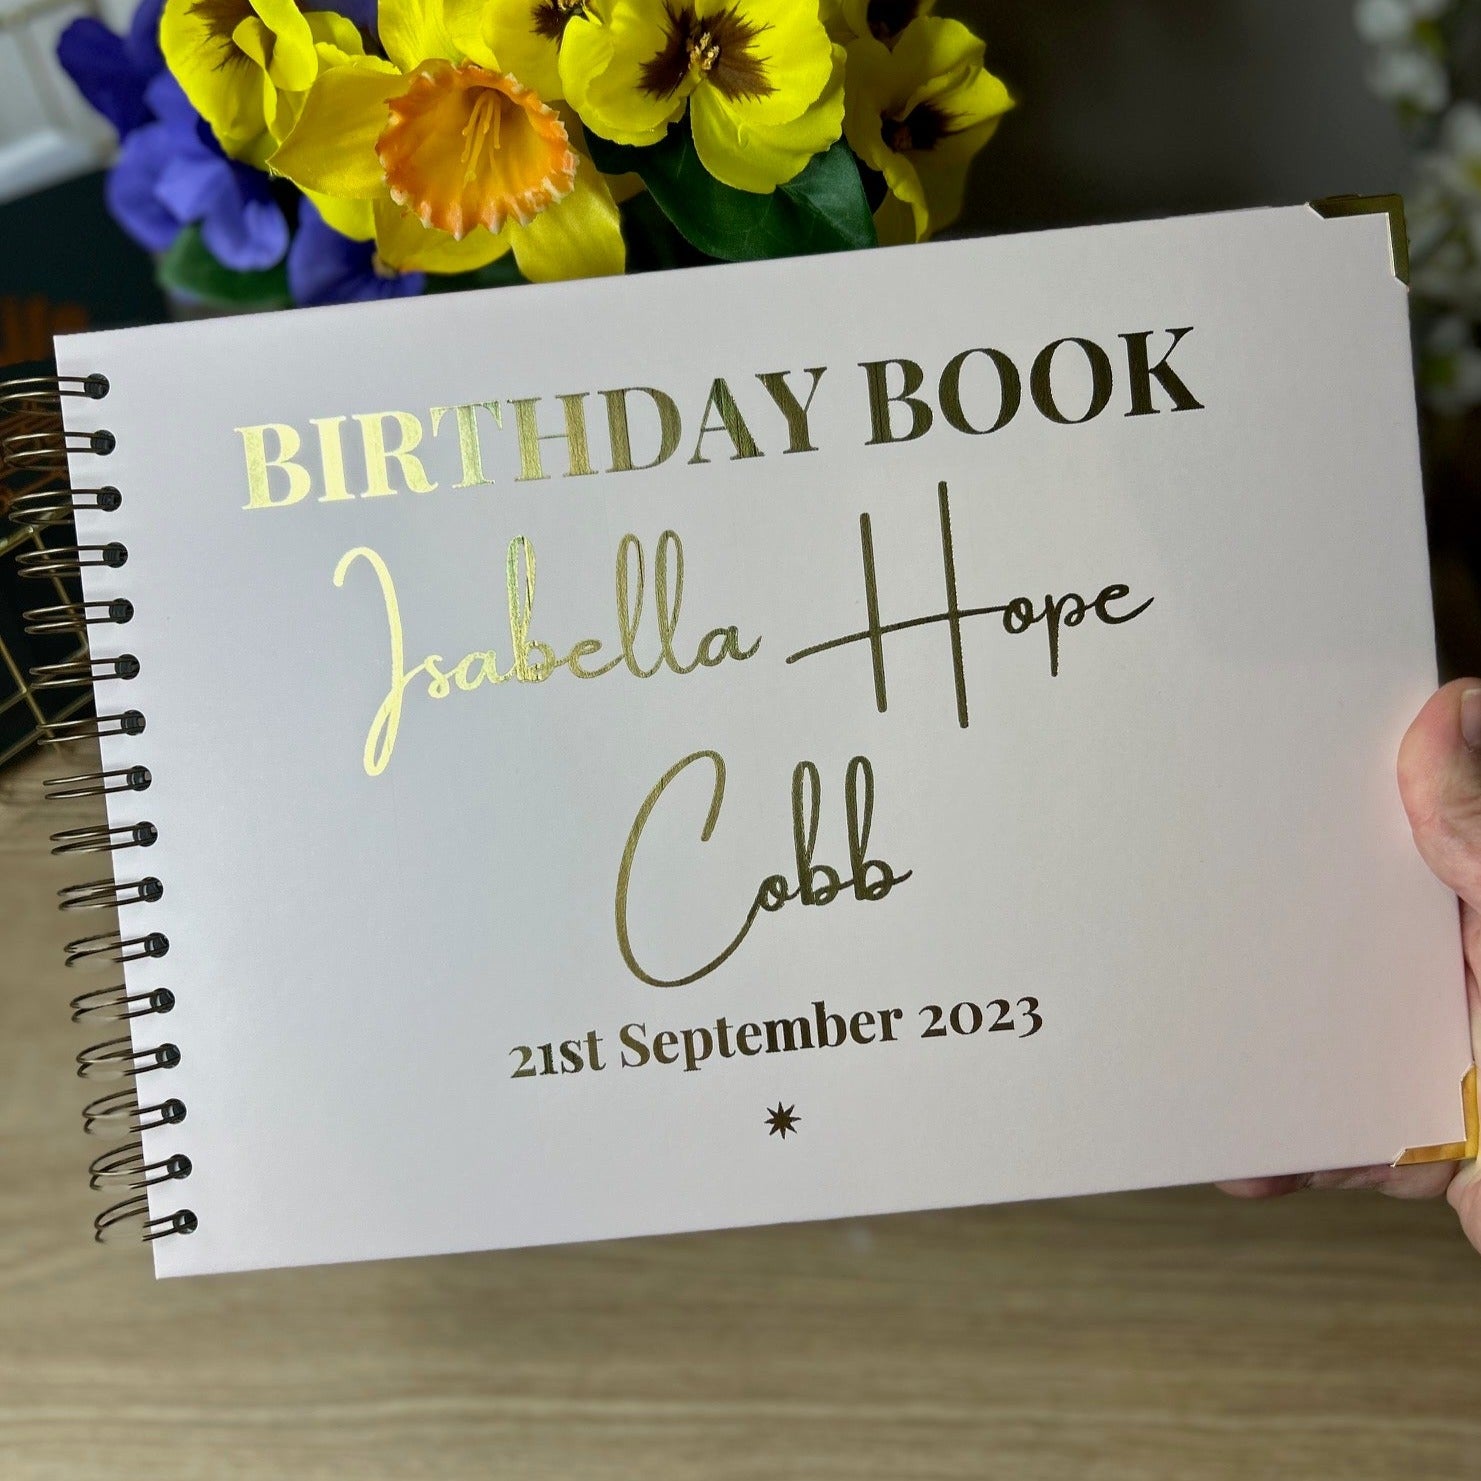 An A4 memory book in stone colour that says 'Birthday Book Isabella Hope Cobb 21st September 2023' in gold foil